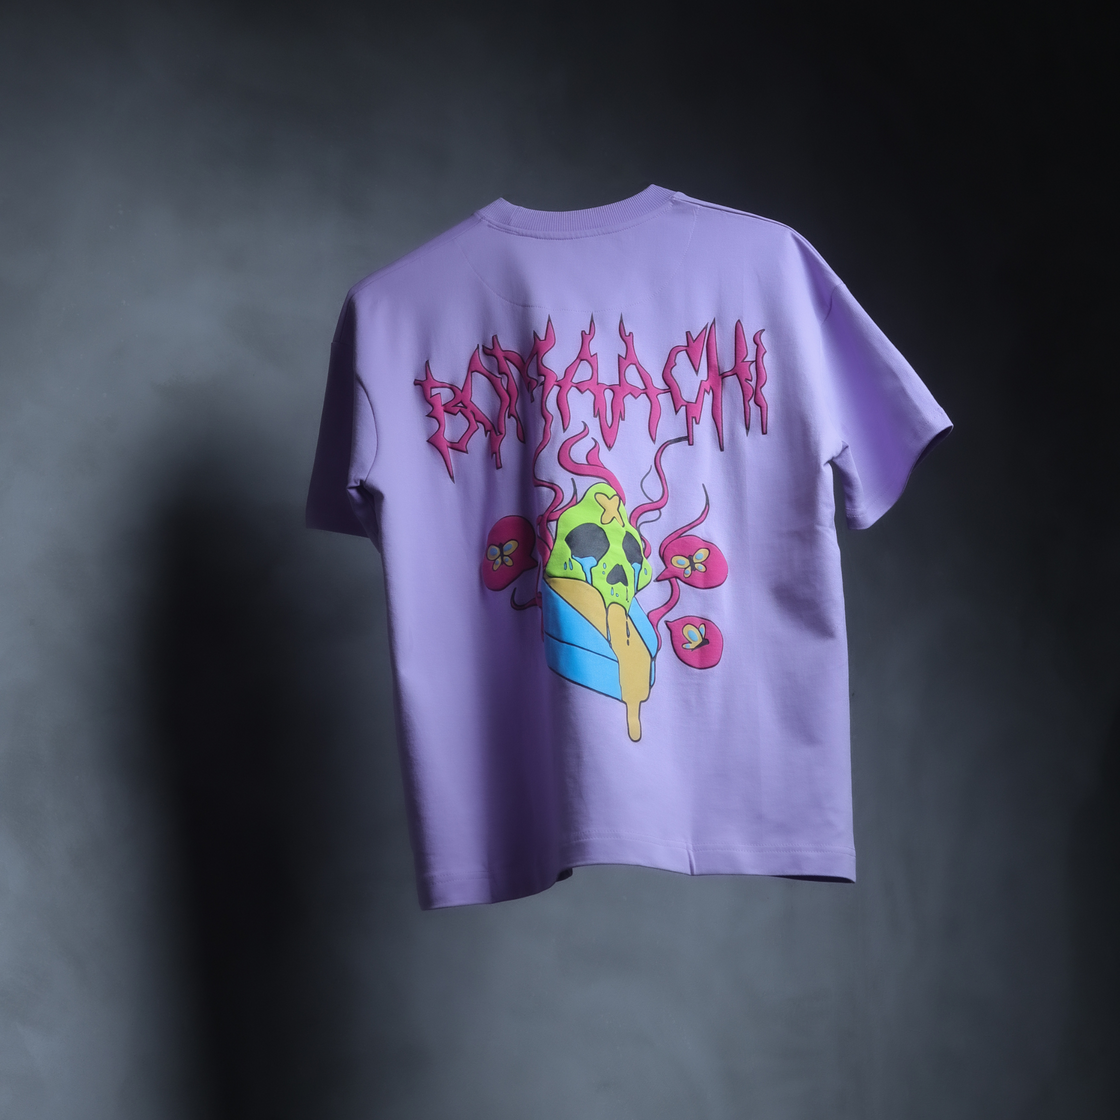 Cheesecaked Demons Printed T-shirt